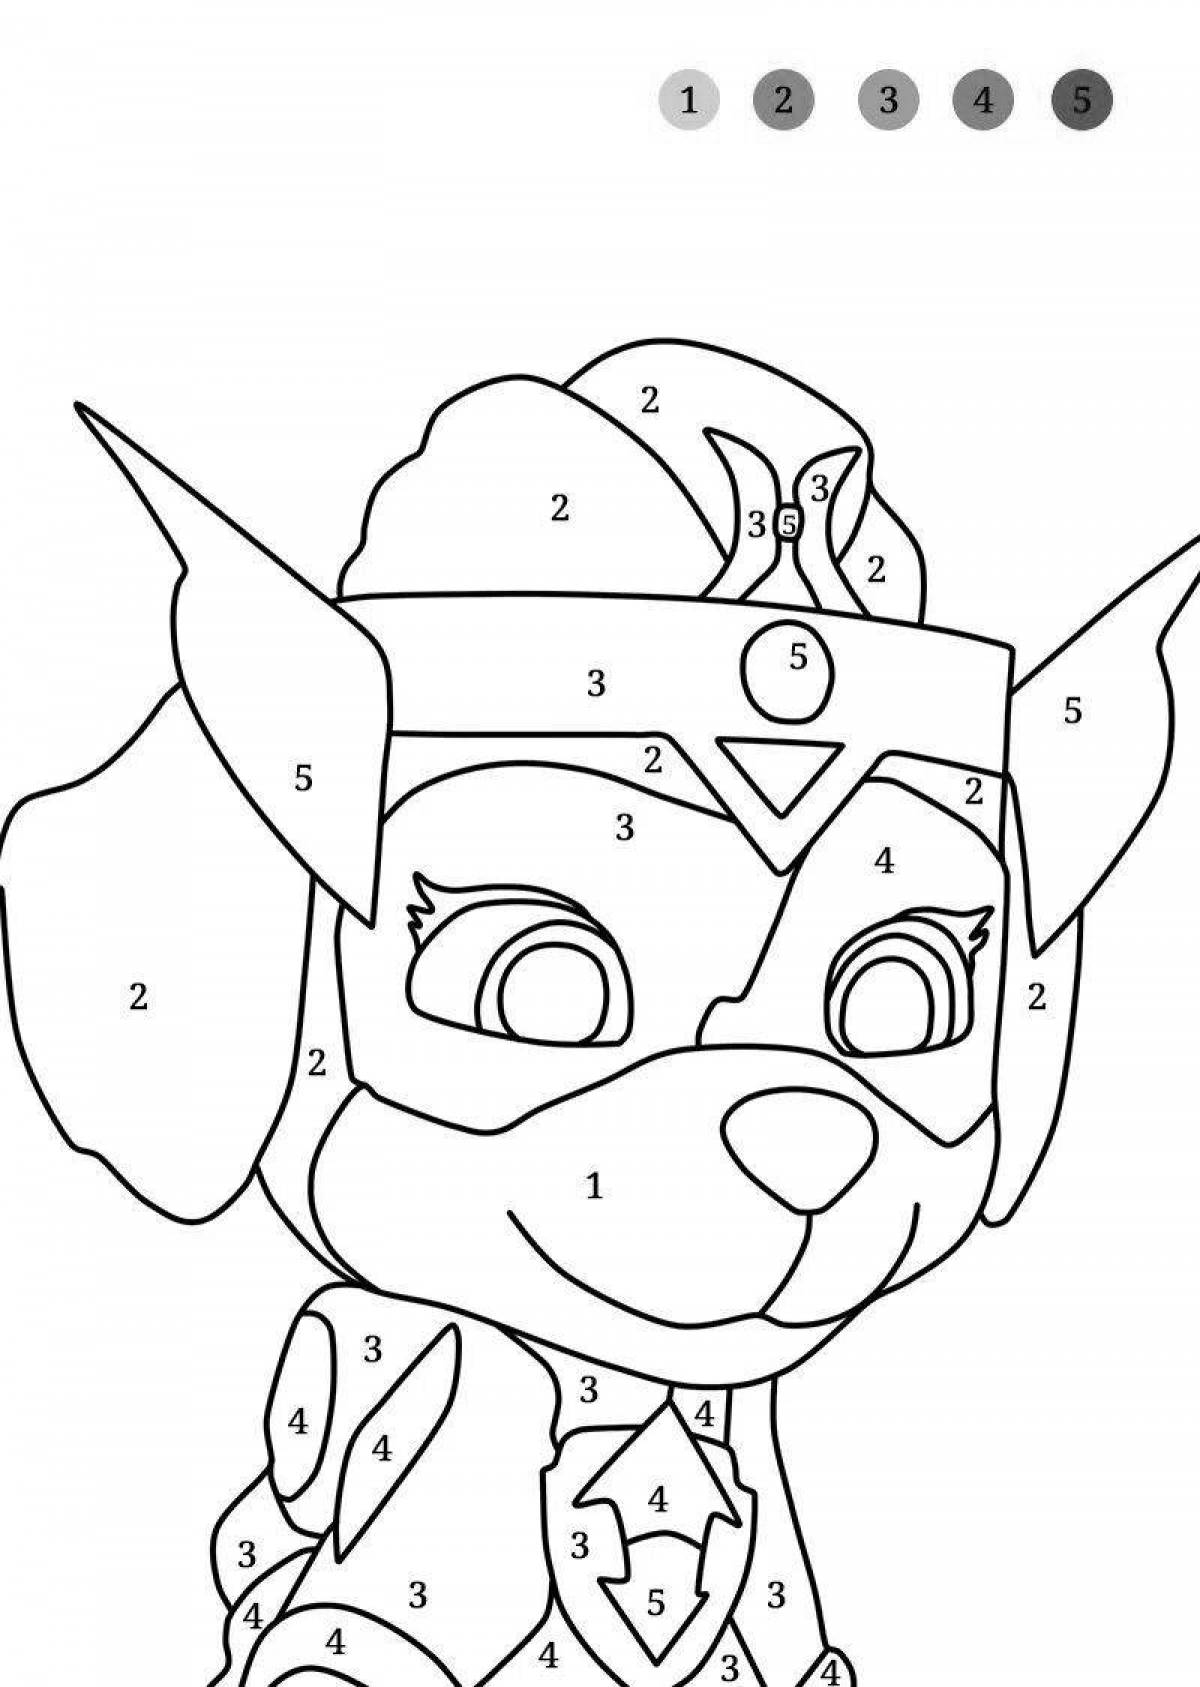 Paw Patrol Live Coloring by Numbers